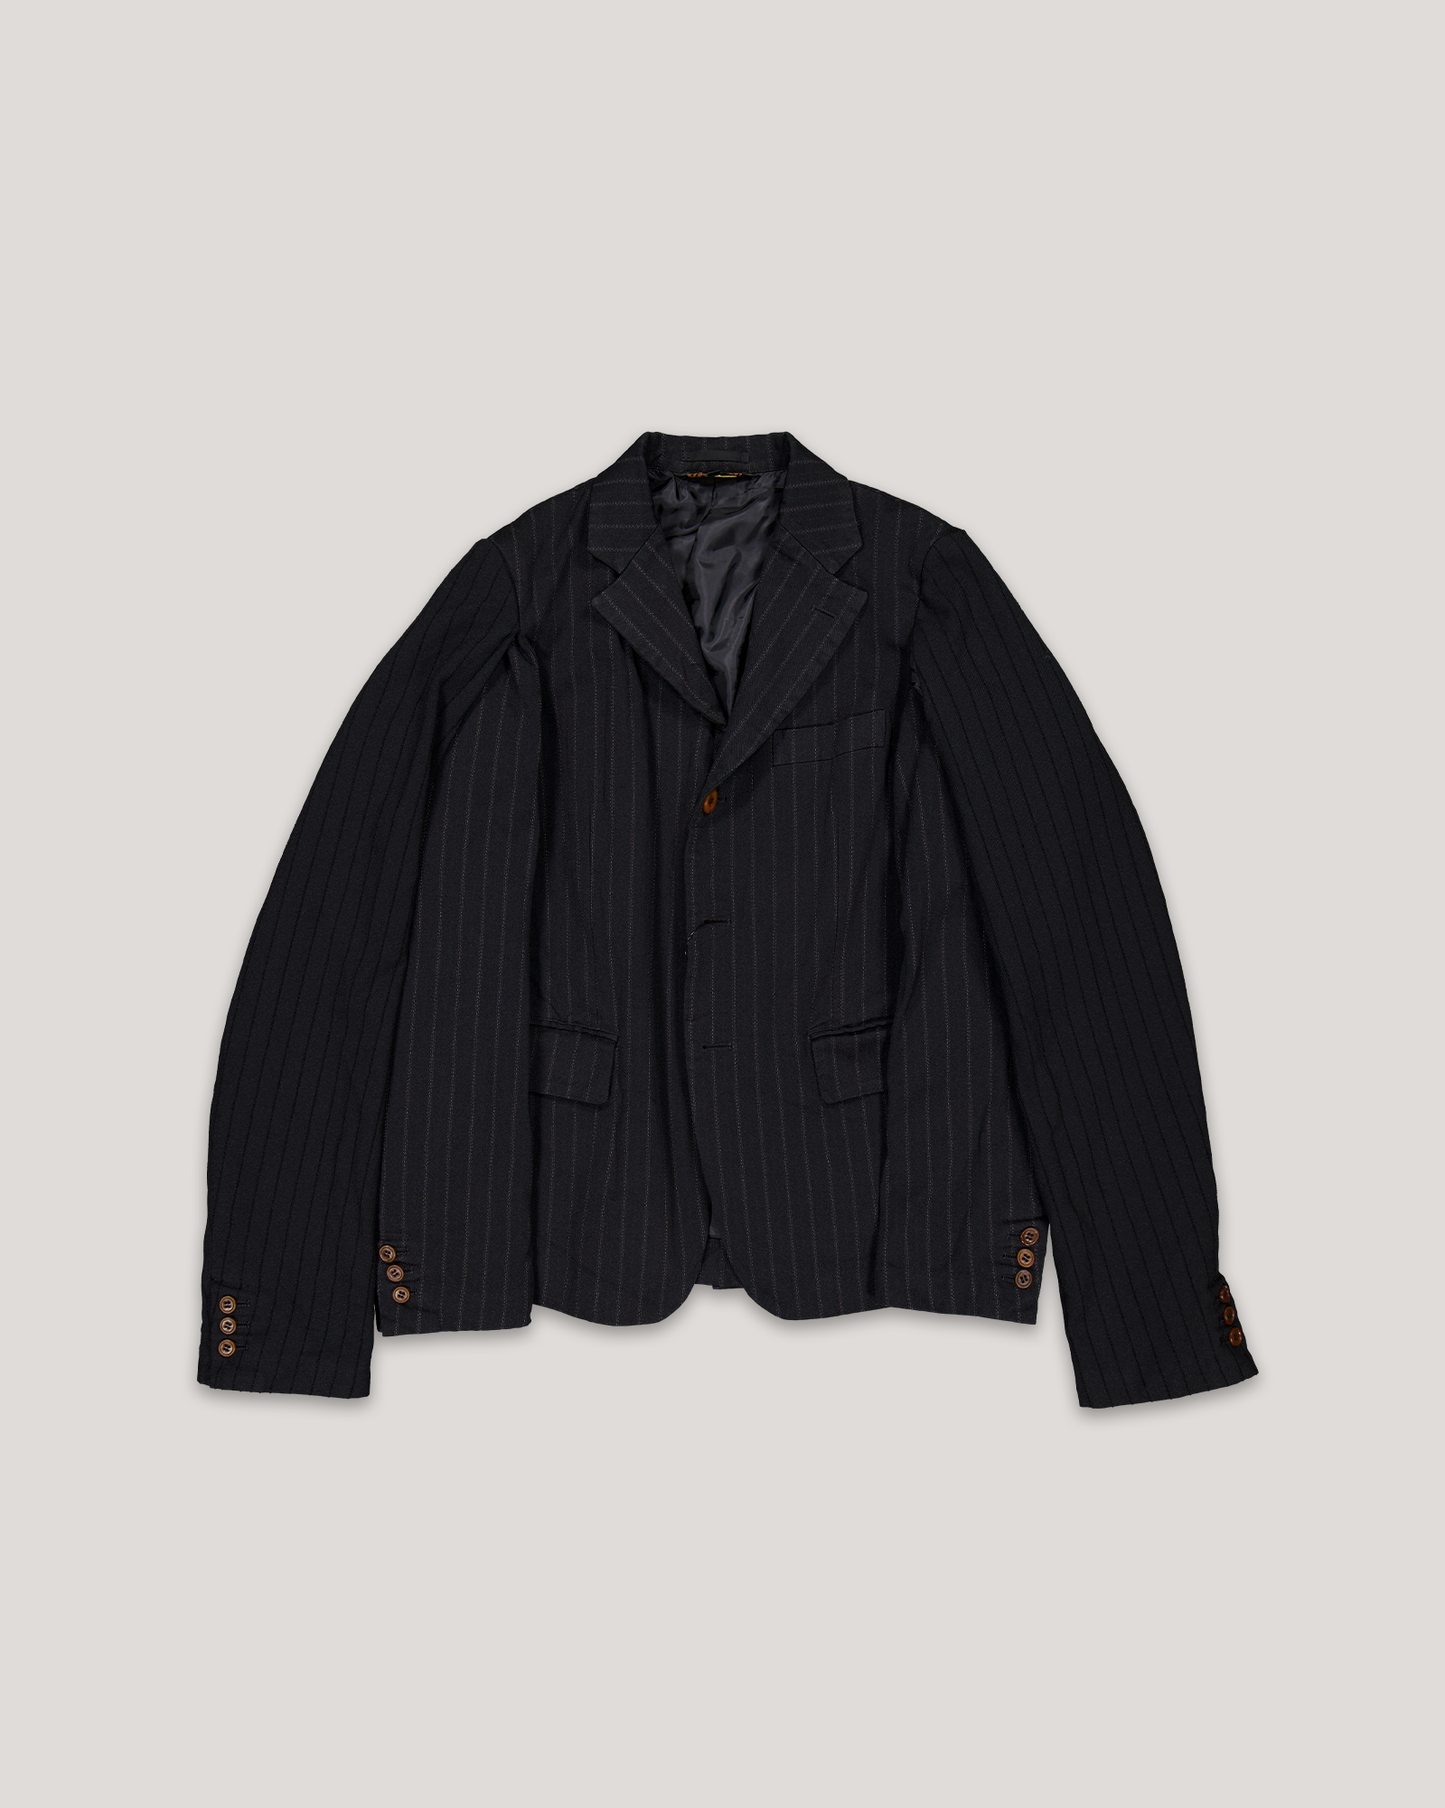 CDG BLACK DOUBLE SLEEVE STRIPED TAILORED JACKET